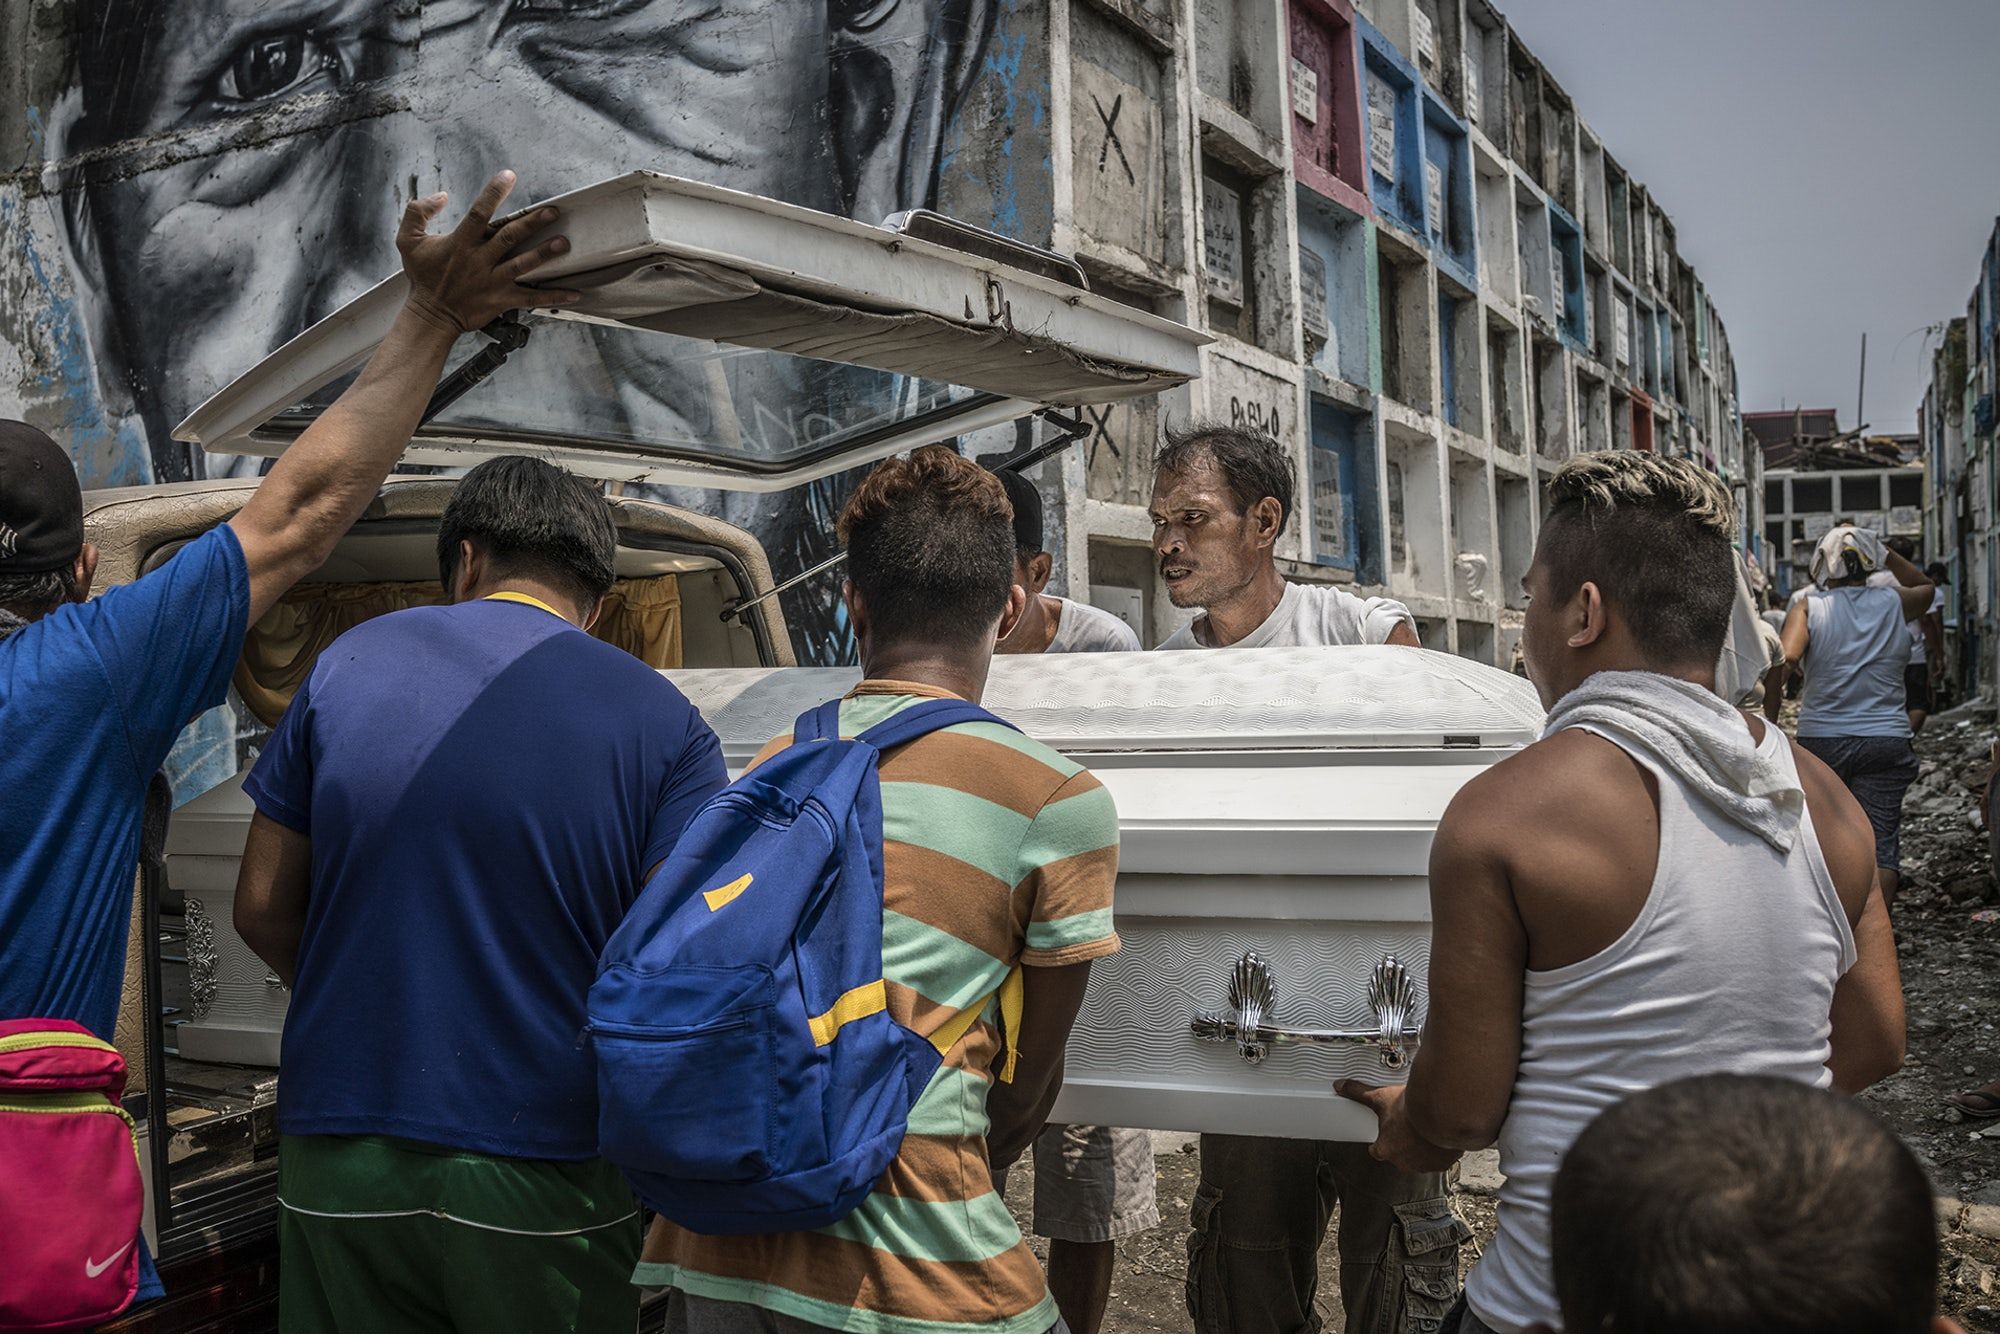 Family and friends lift a coffin carrying Junmar Abletes—another victim of an extrajudicial killing—out of a hearse in Navotas’s Catholic Cemetery. Abletes, who was 27 when he died, had moved to the island of Samar, over 370 miles away from his home in Metro Manila. While back on a family visit, he was assassinated in the Market 3 slum in Navotas, where his family lives. Image by James Whitlow Delano. Philippines, 2017.